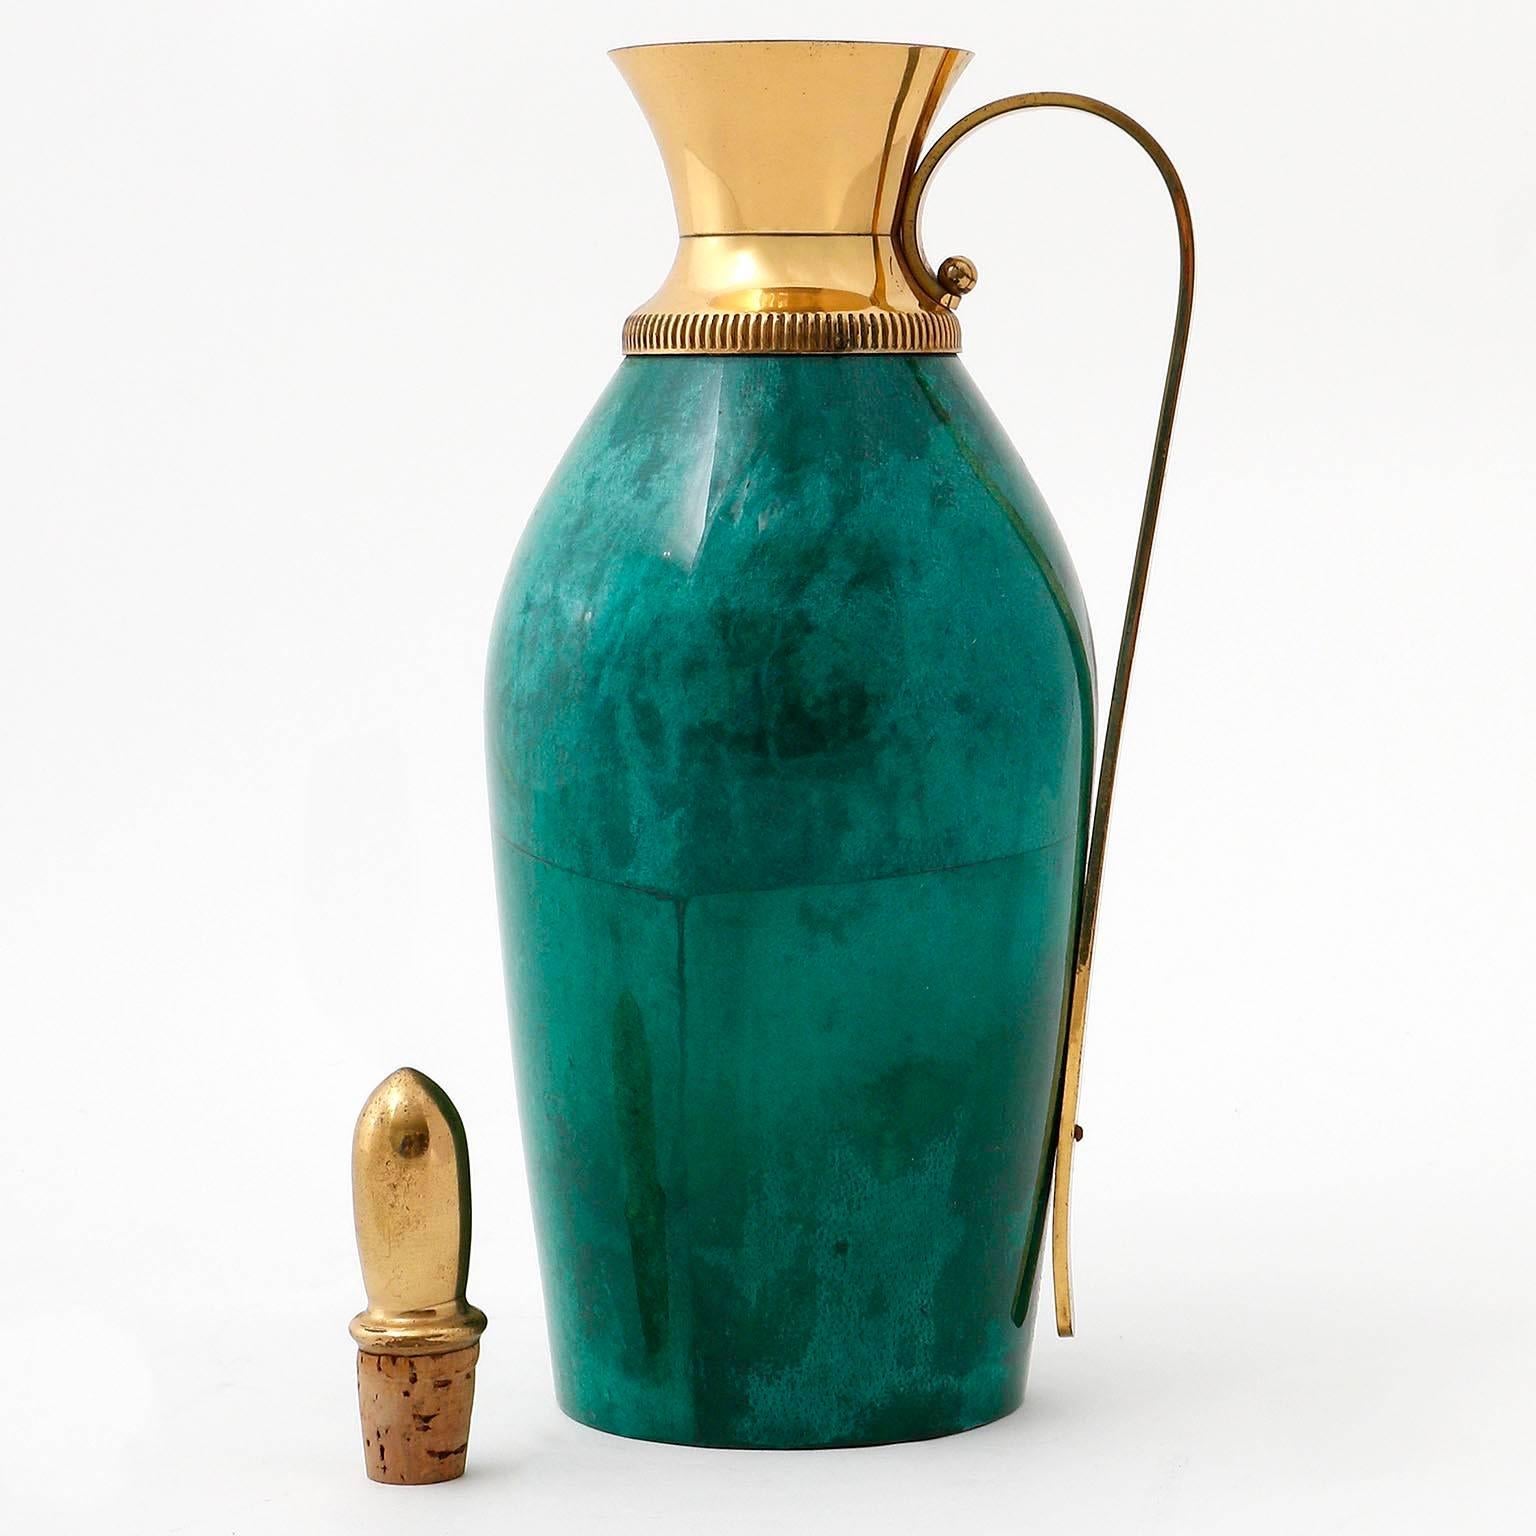 An Italian carafe in lacquered emerald green goatskin with brass details by Aldo Tura for Macabo, manufactured in Mid-Century, circa 1960 (late 1950s or early 1960s).
The bottle is labeled on the bottom.